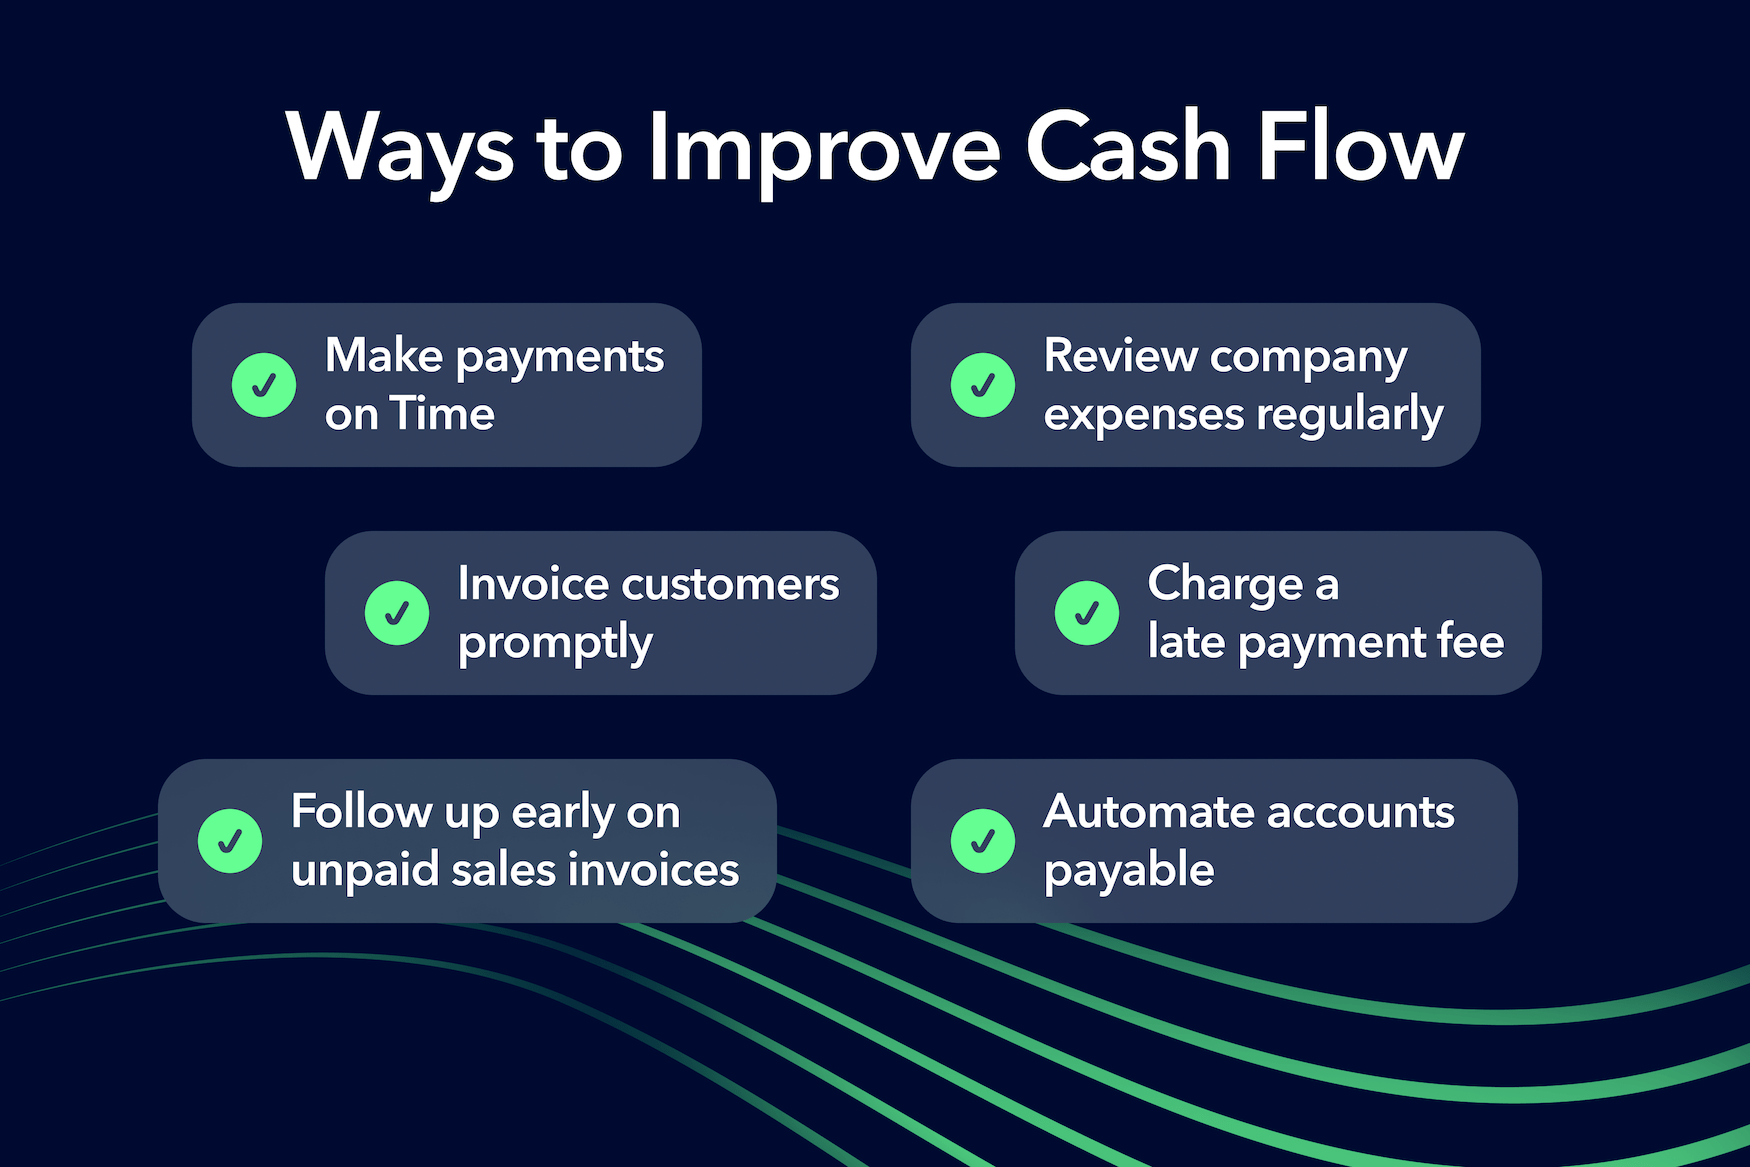 Ways to improve cash flow: make payments on time, invoice customers promptly, follow up early on unpaid sales invoices, charge a late payment fee